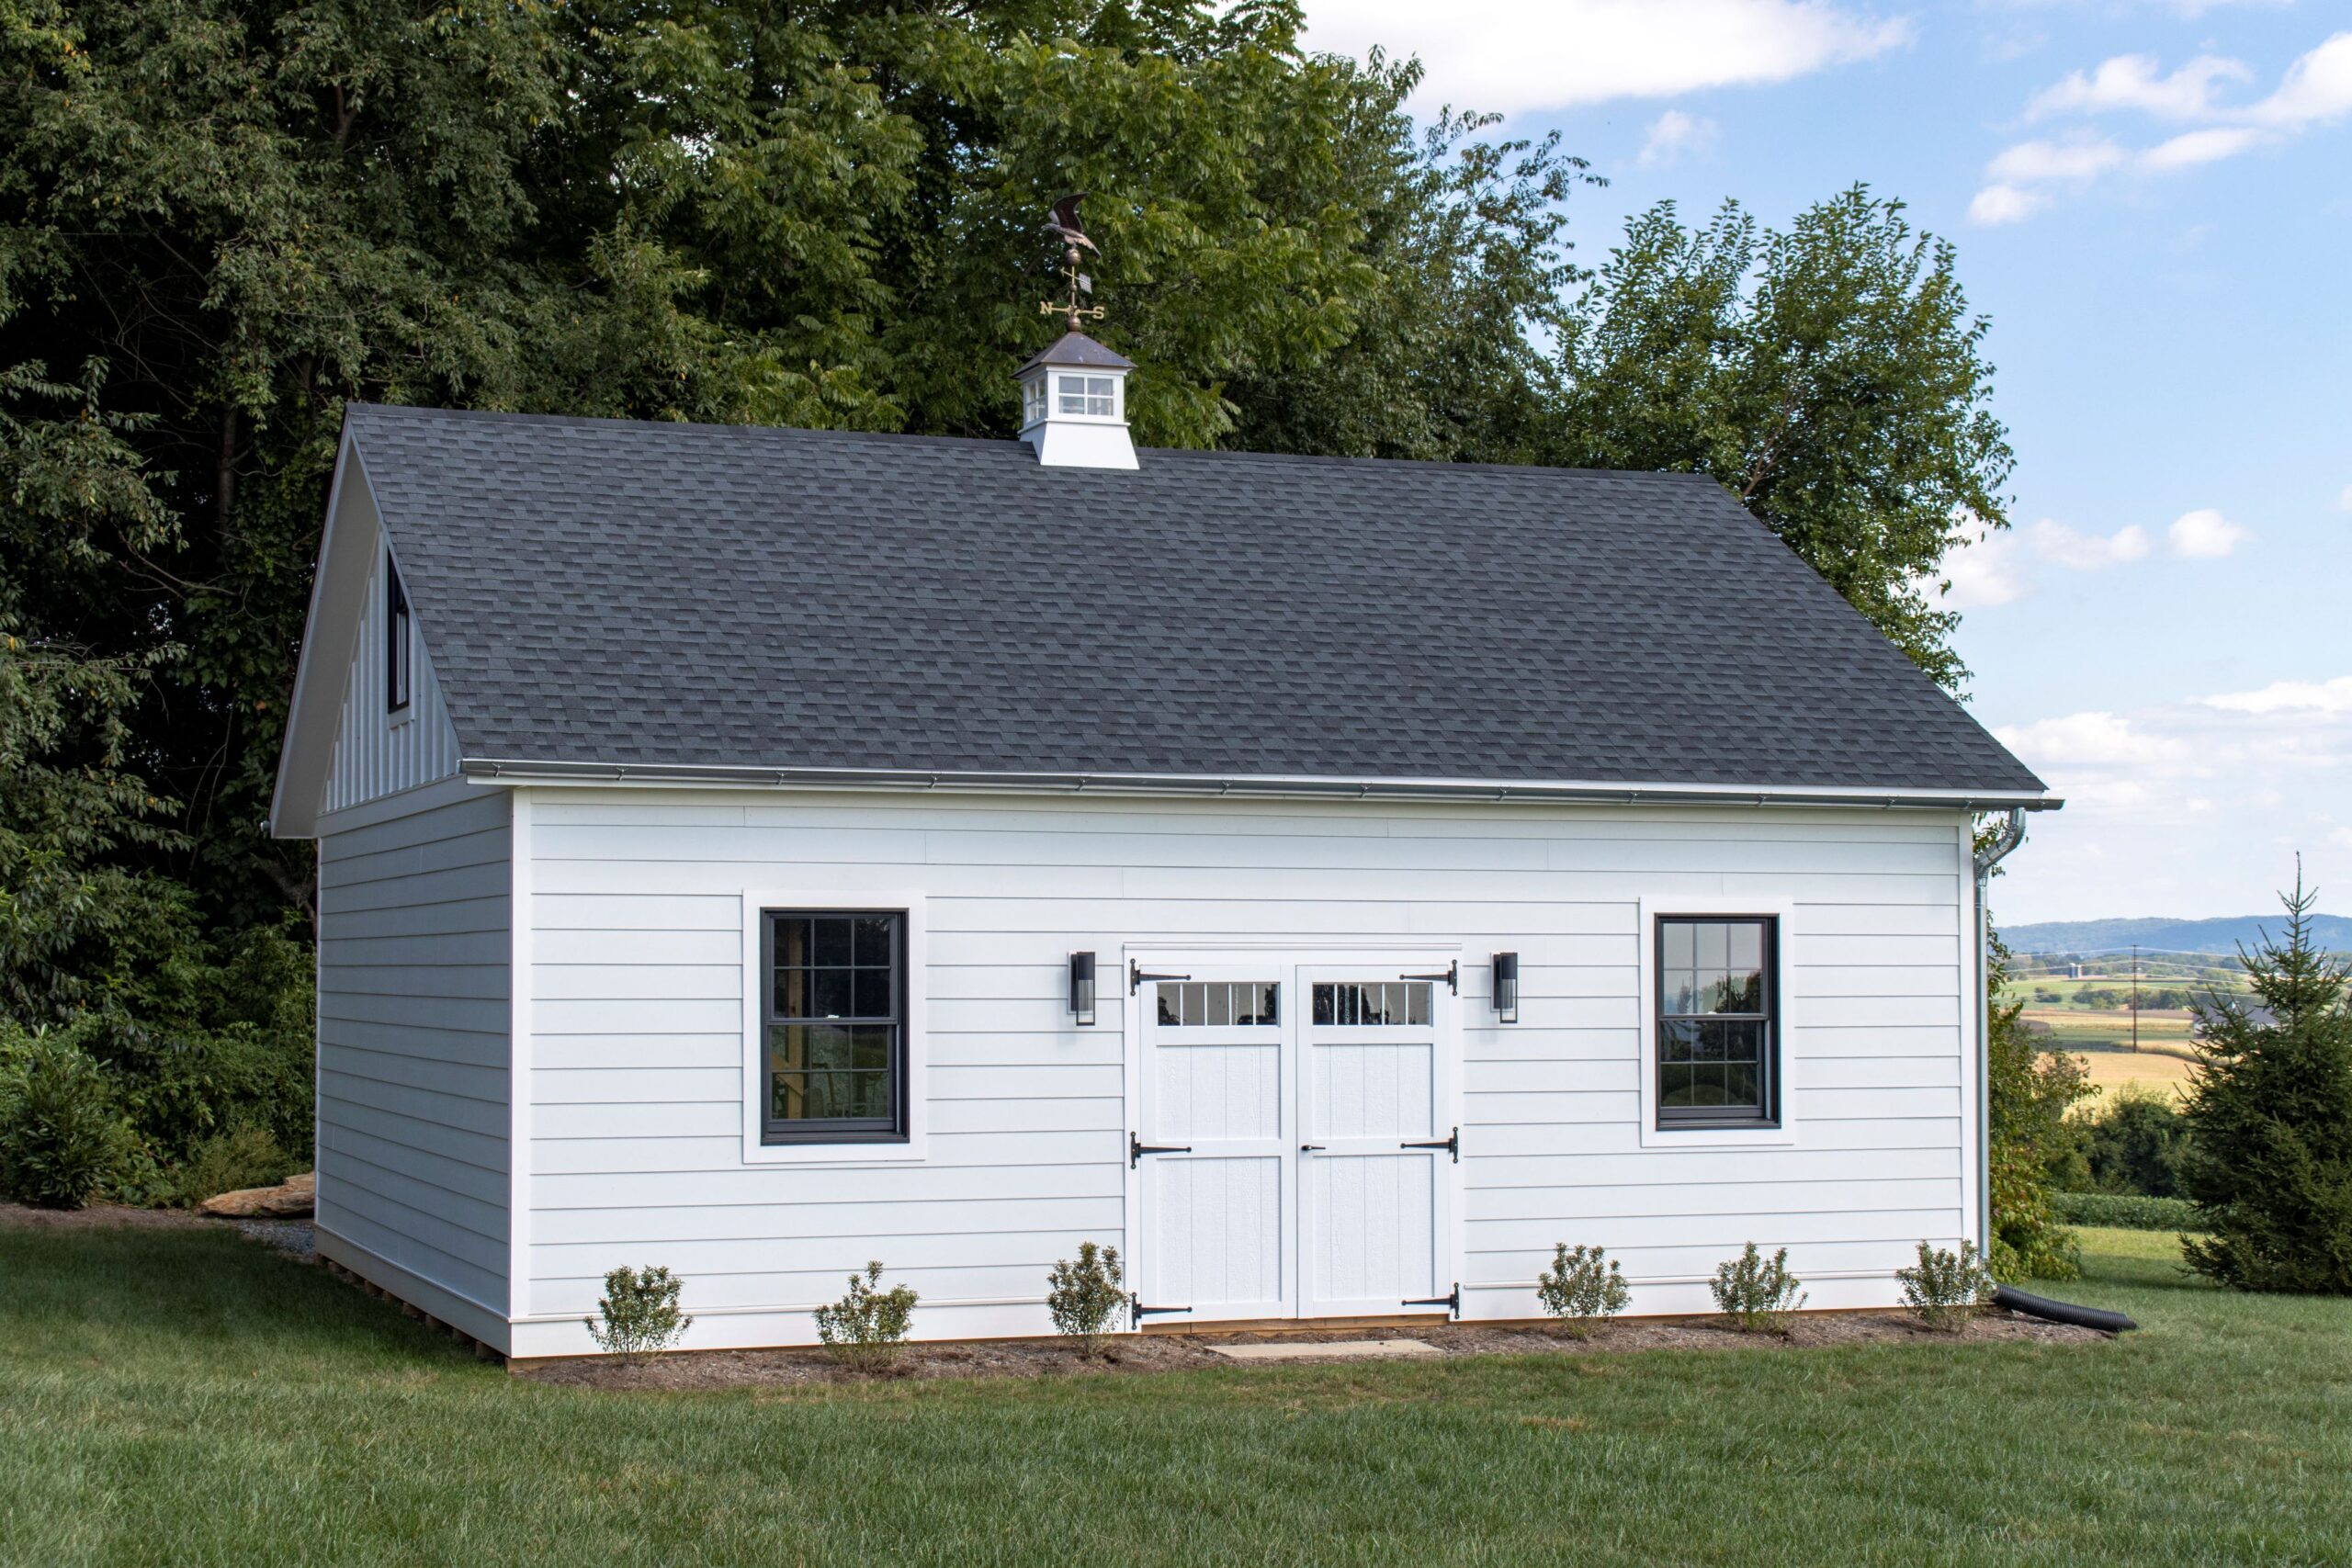 Exterior of a 2-story, 2-car Garden Shed Garage with white siding and gray roofing.